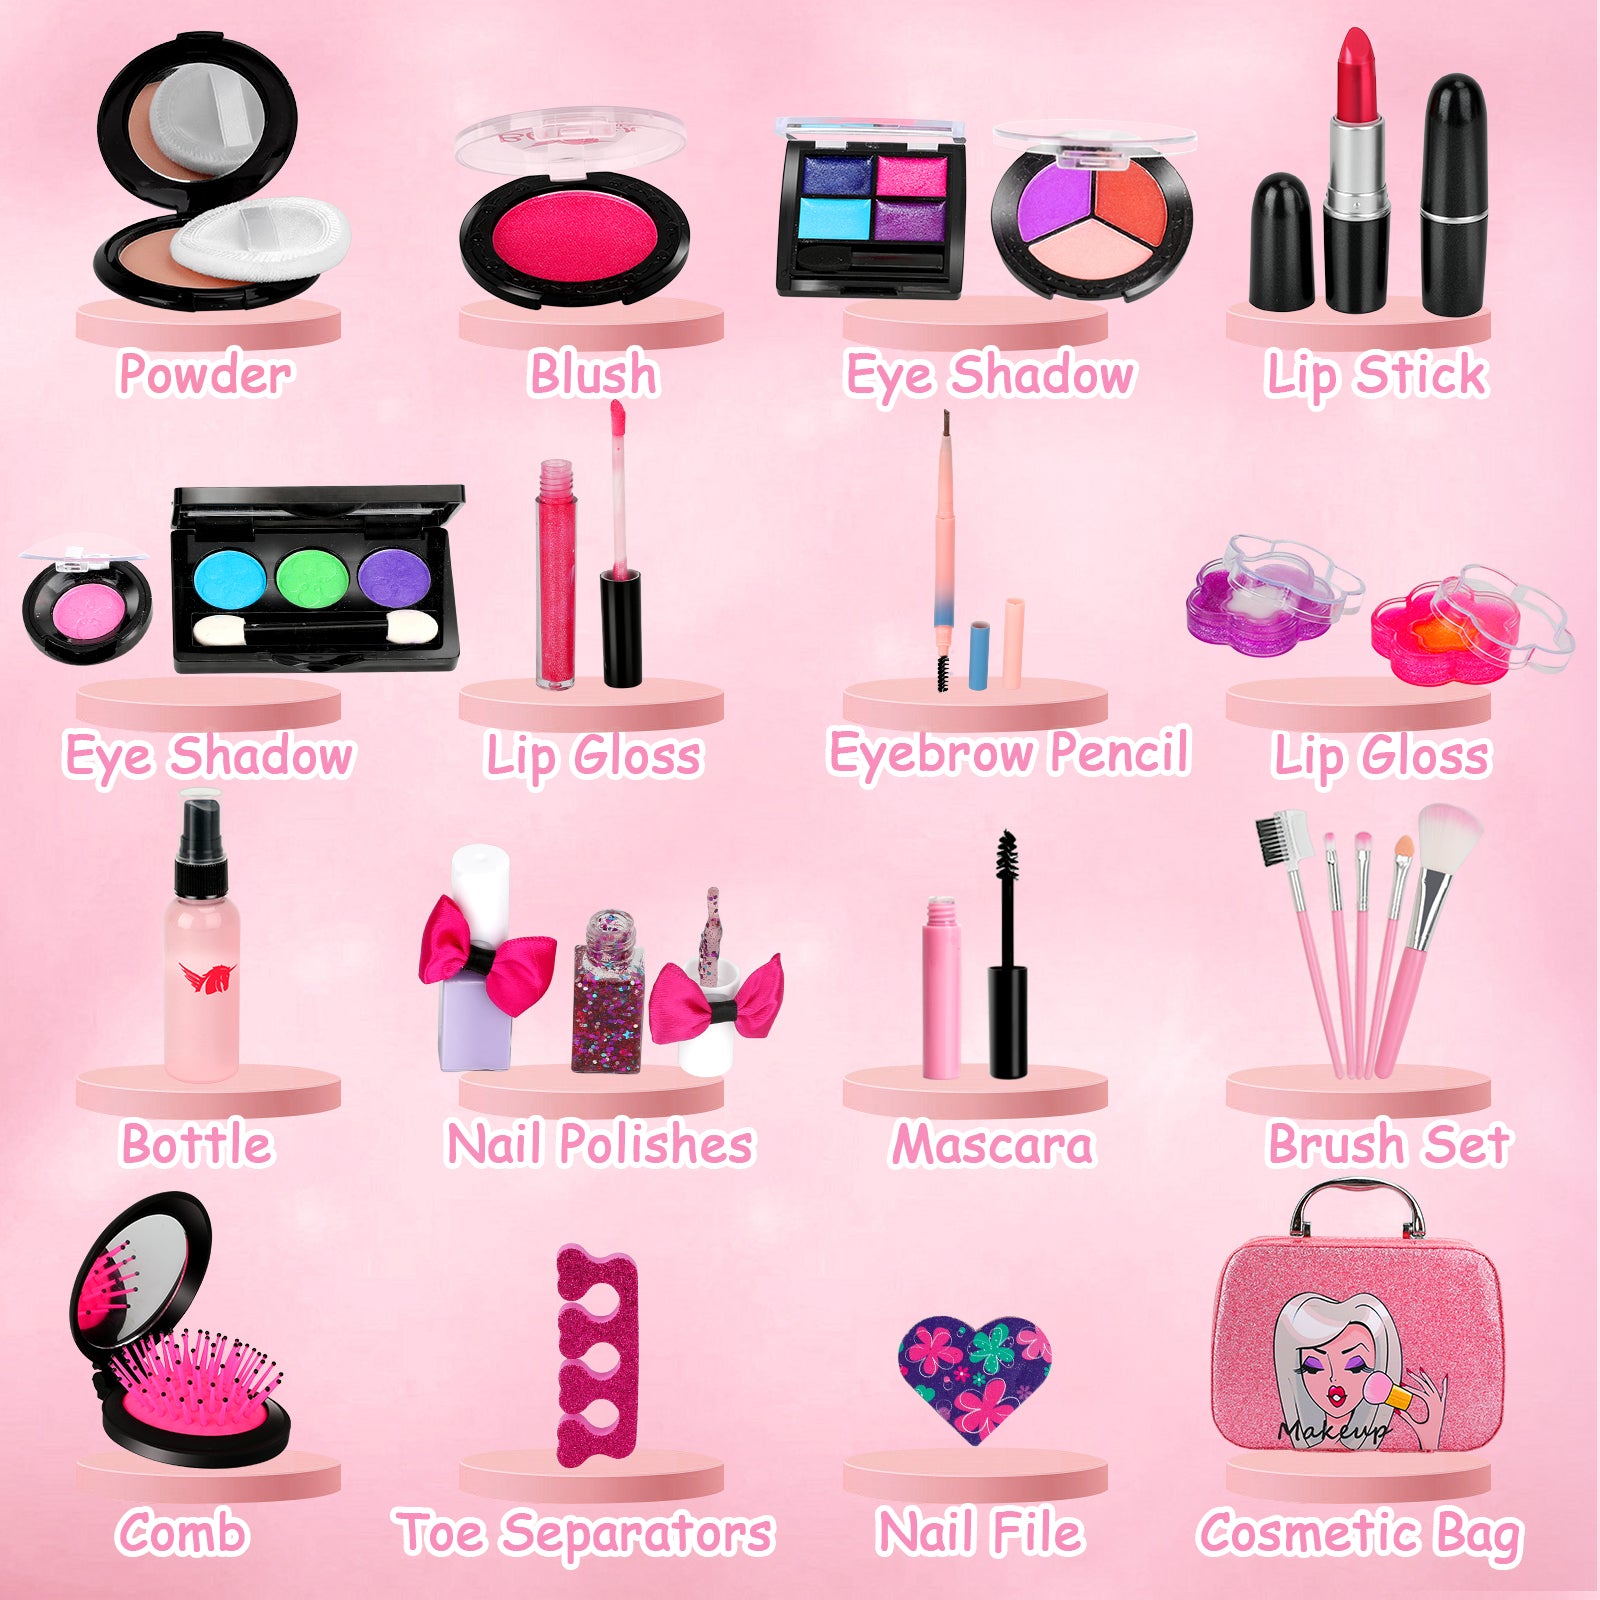 Kids Makeup Kit for Girls, Washable Girls Makeup Kit with Cosmetic